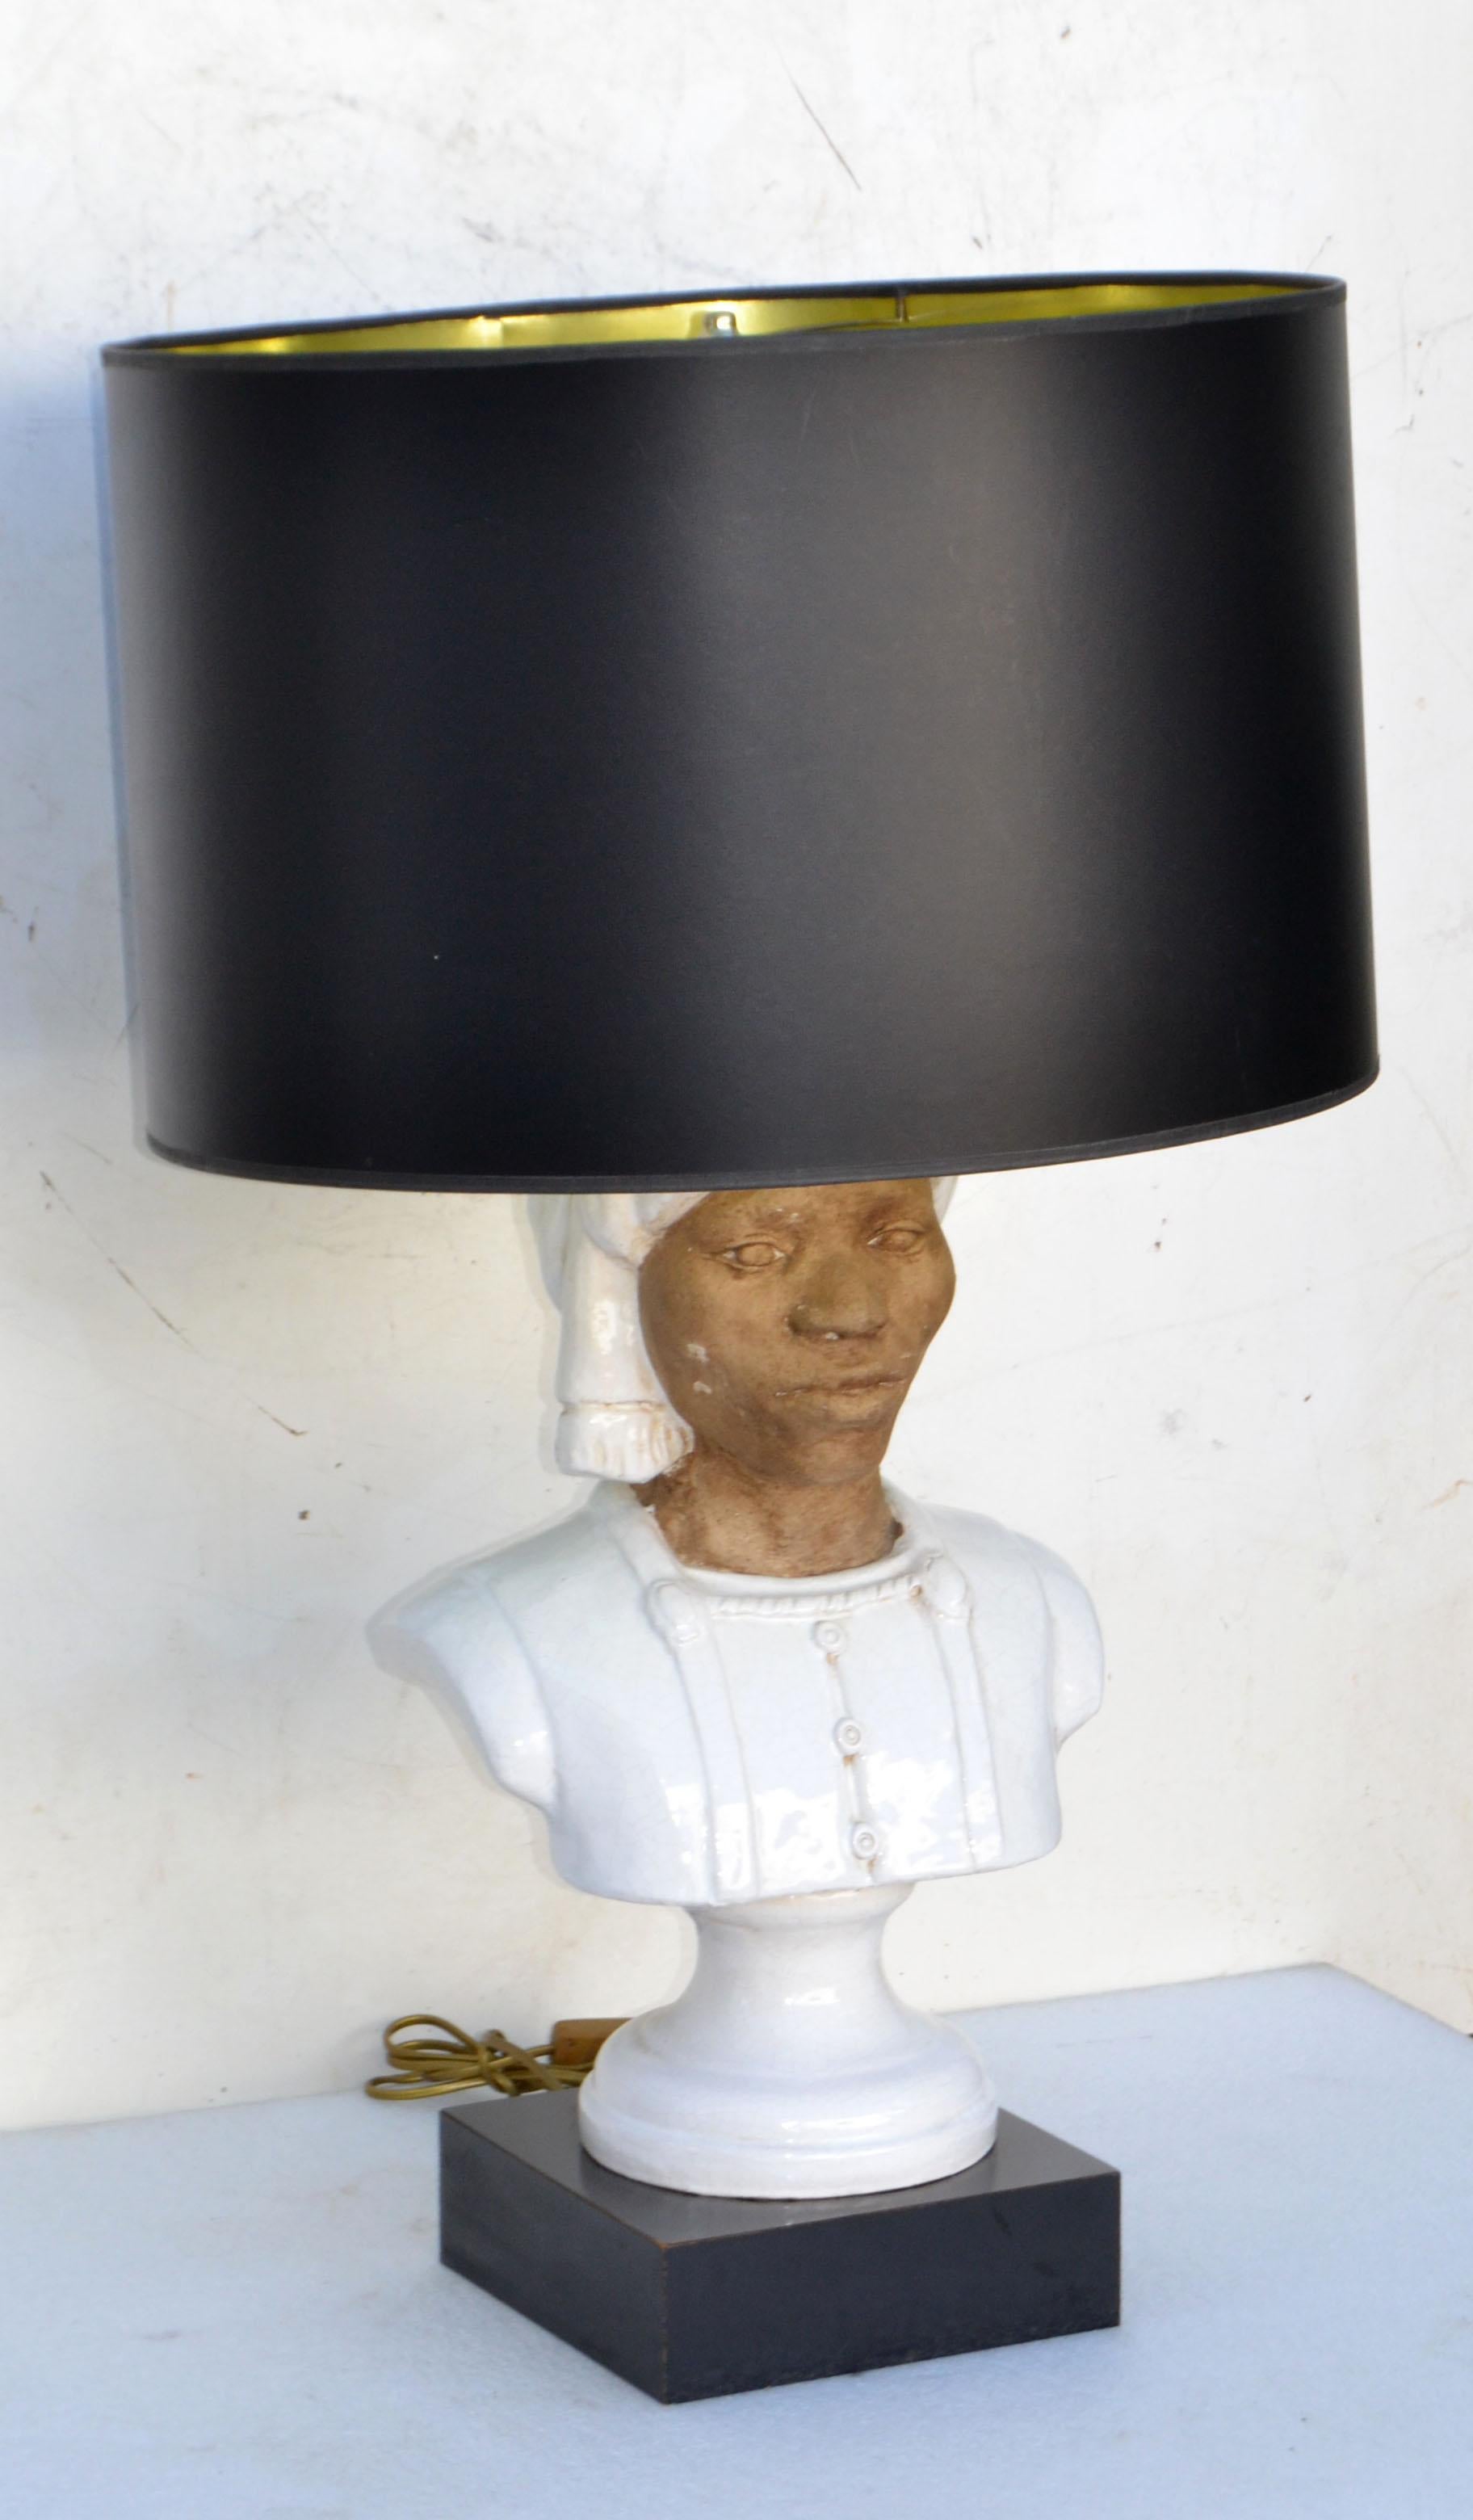 Hand-Carved Art Deco Bedouin Head Bust Terracotta, Glazed Ceramic & Wood Table Lamp, 1950 For Sale